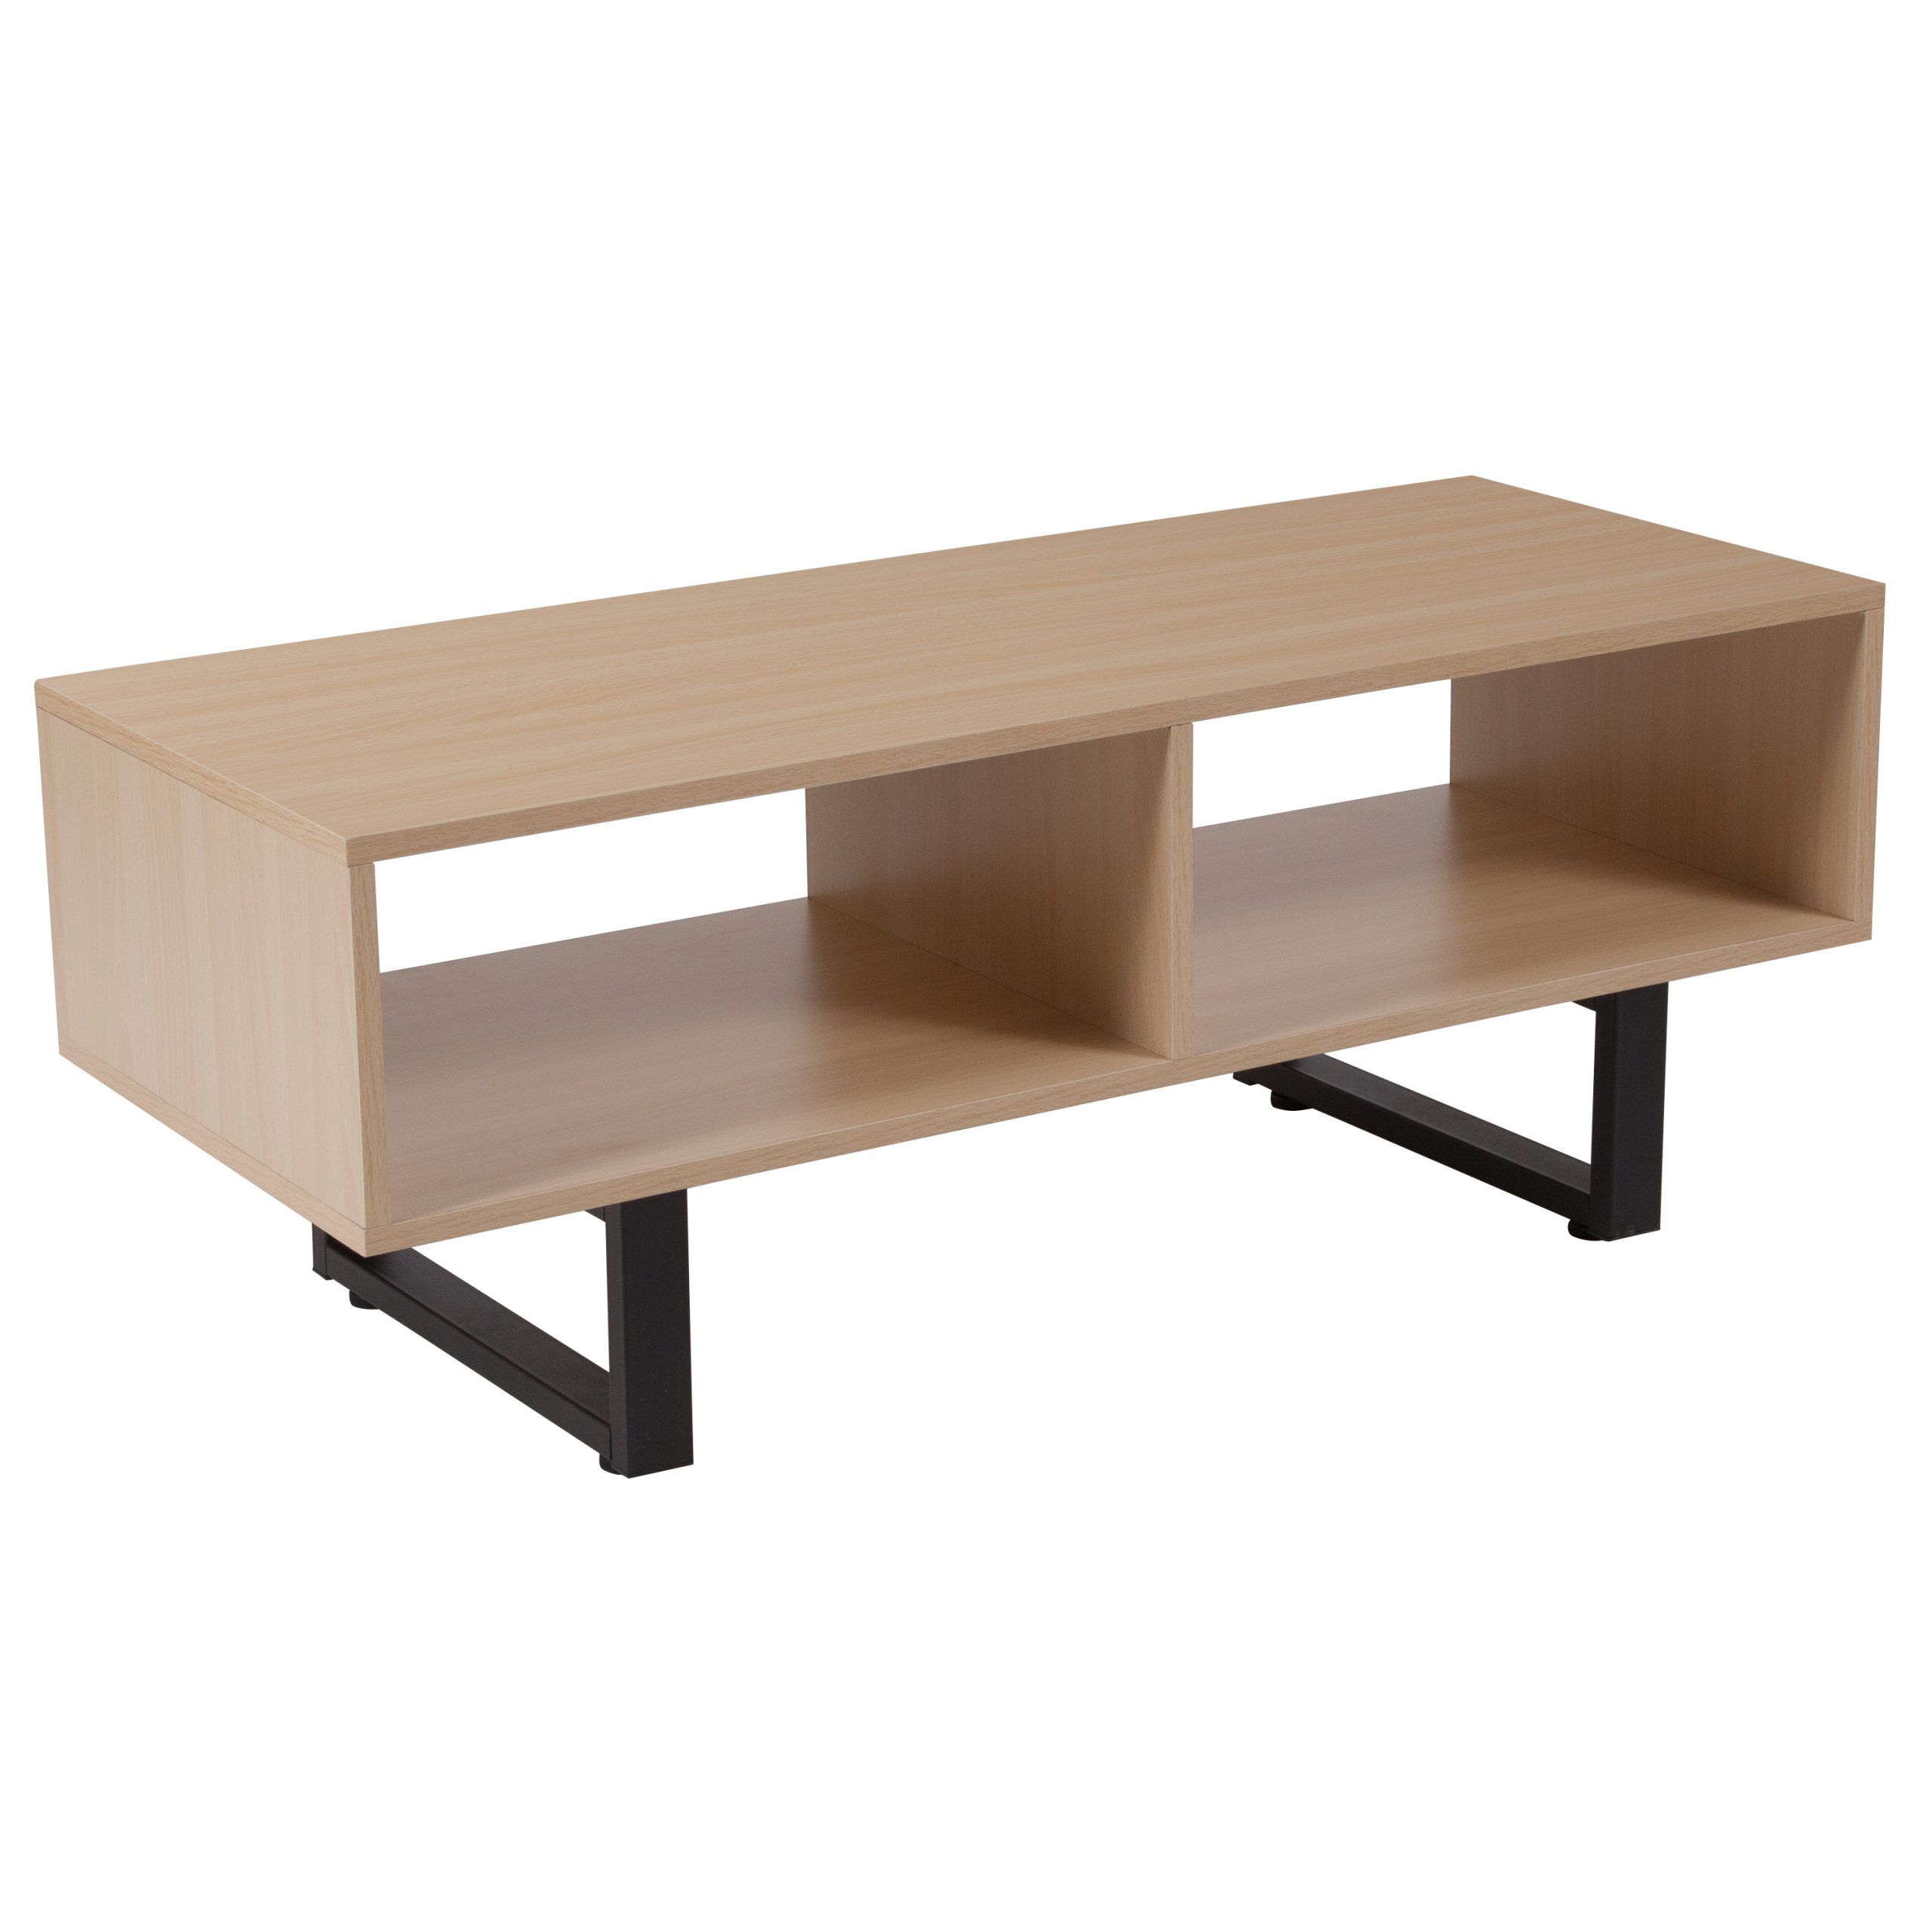 Flash Furniture Hyde Square Collection Beech Wood Grain For Square Tv Stands (View 8 of 15)